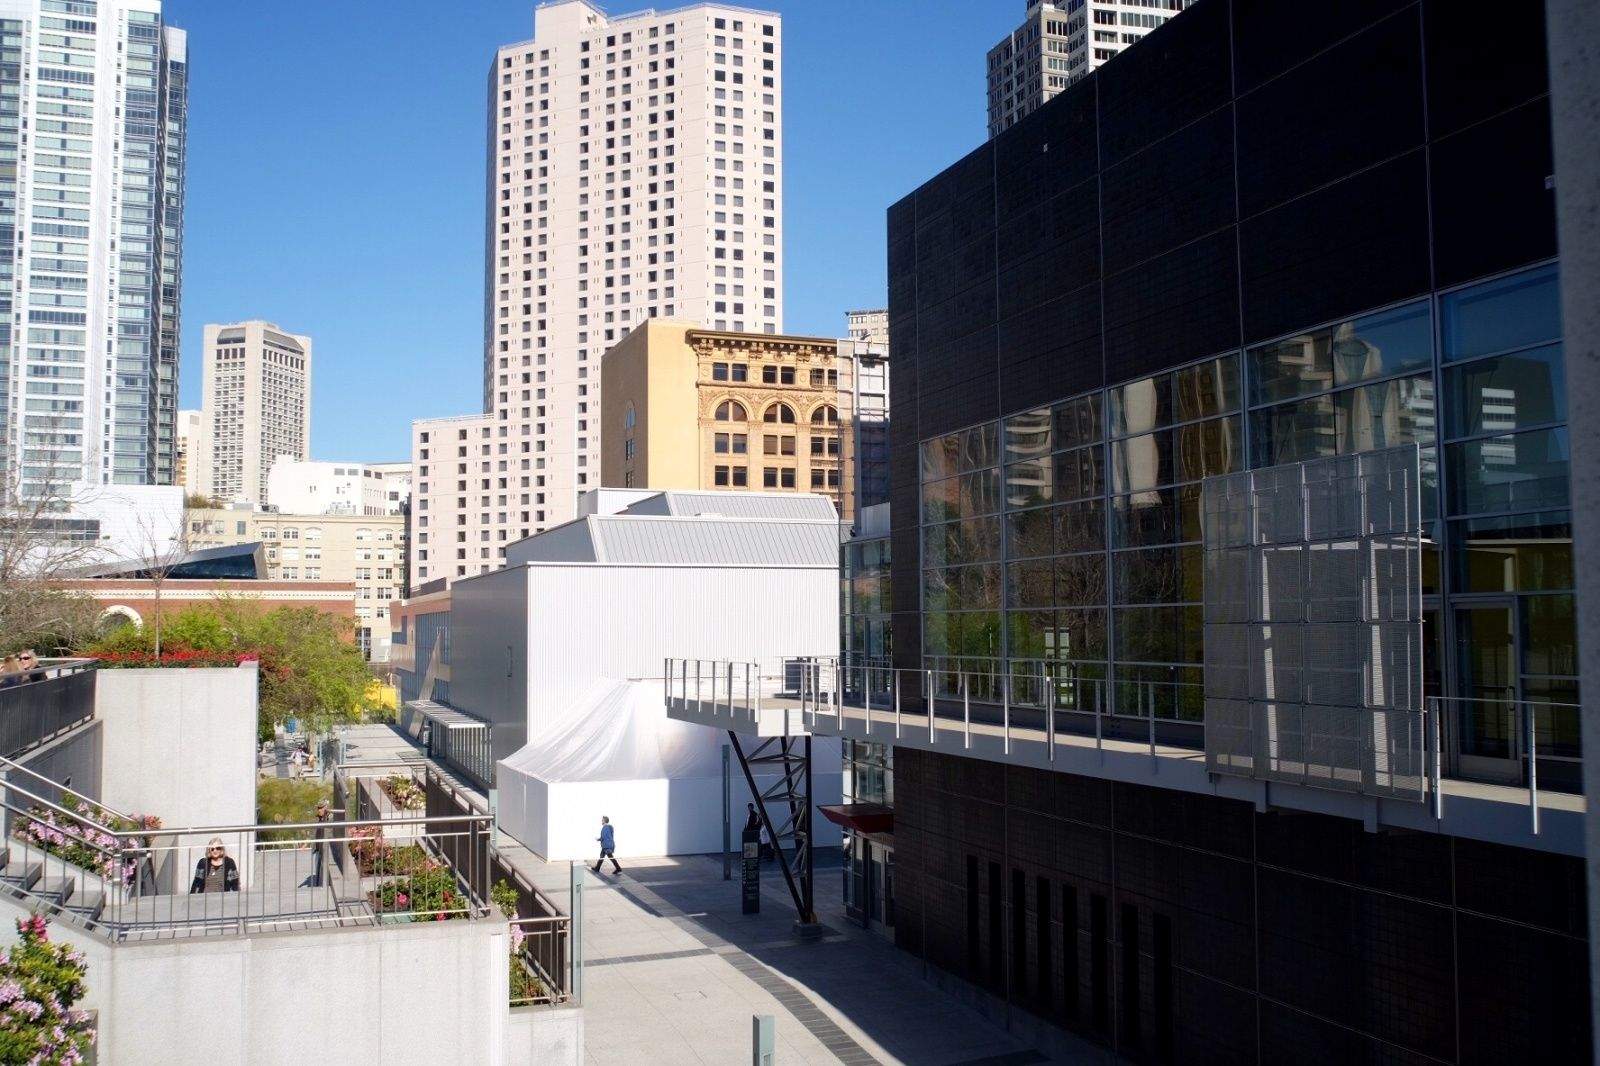 Apple's tiny white tent nestles between buildings at San Francisco's Yerba Buena Center for the Arts. Photo: Jim Merithew/ Cult of Mac